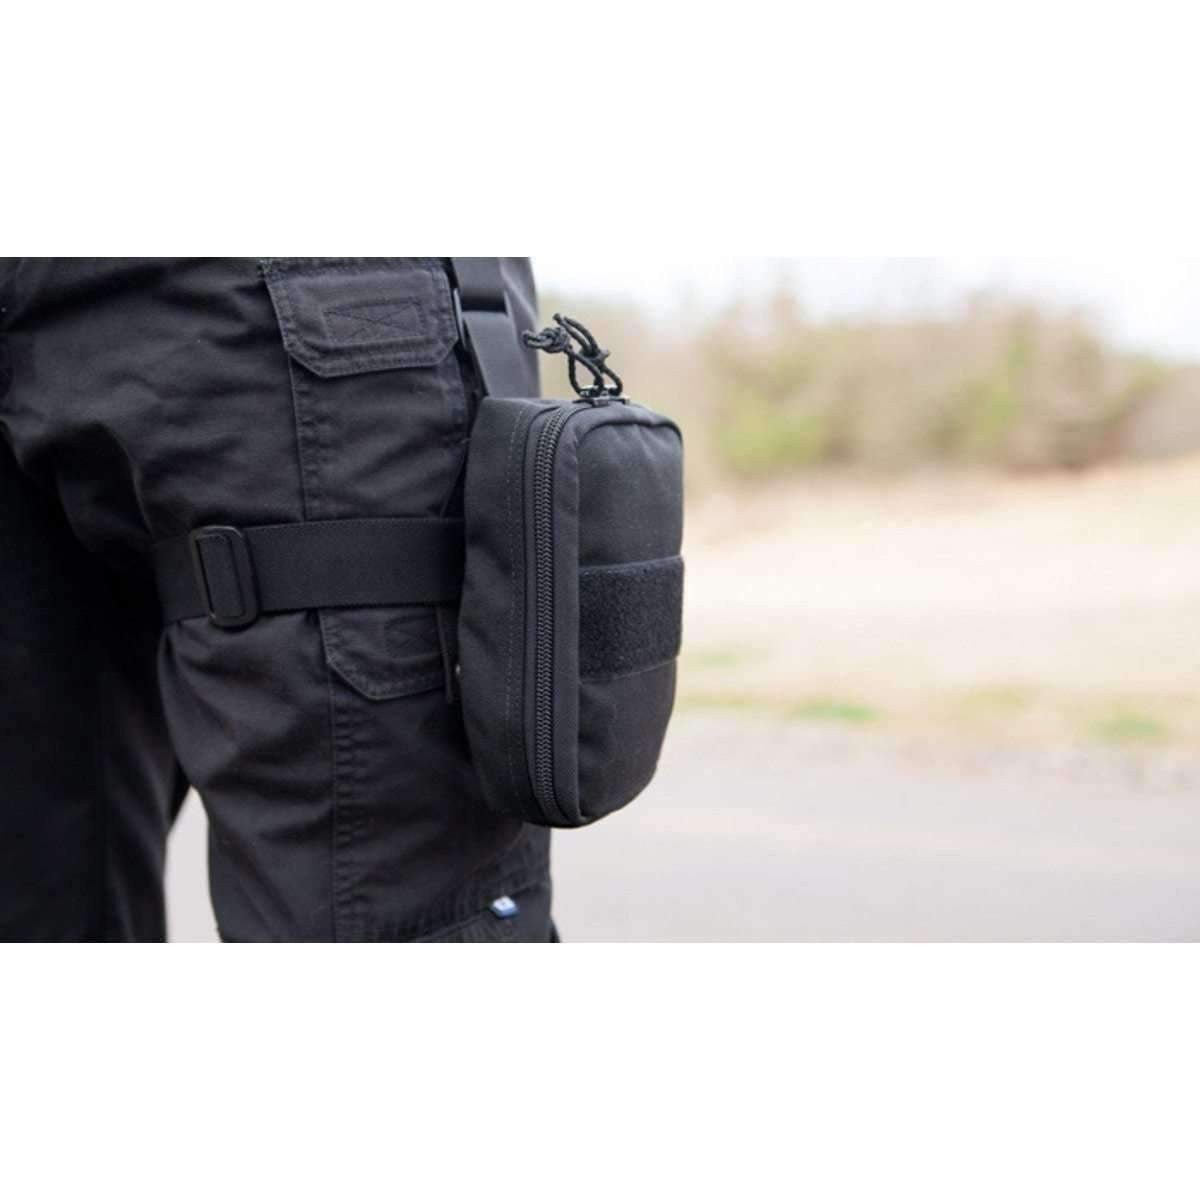 TACMED™ LAPD Pouch - MED-TAC International Corp. - Tactical Medical Solutions